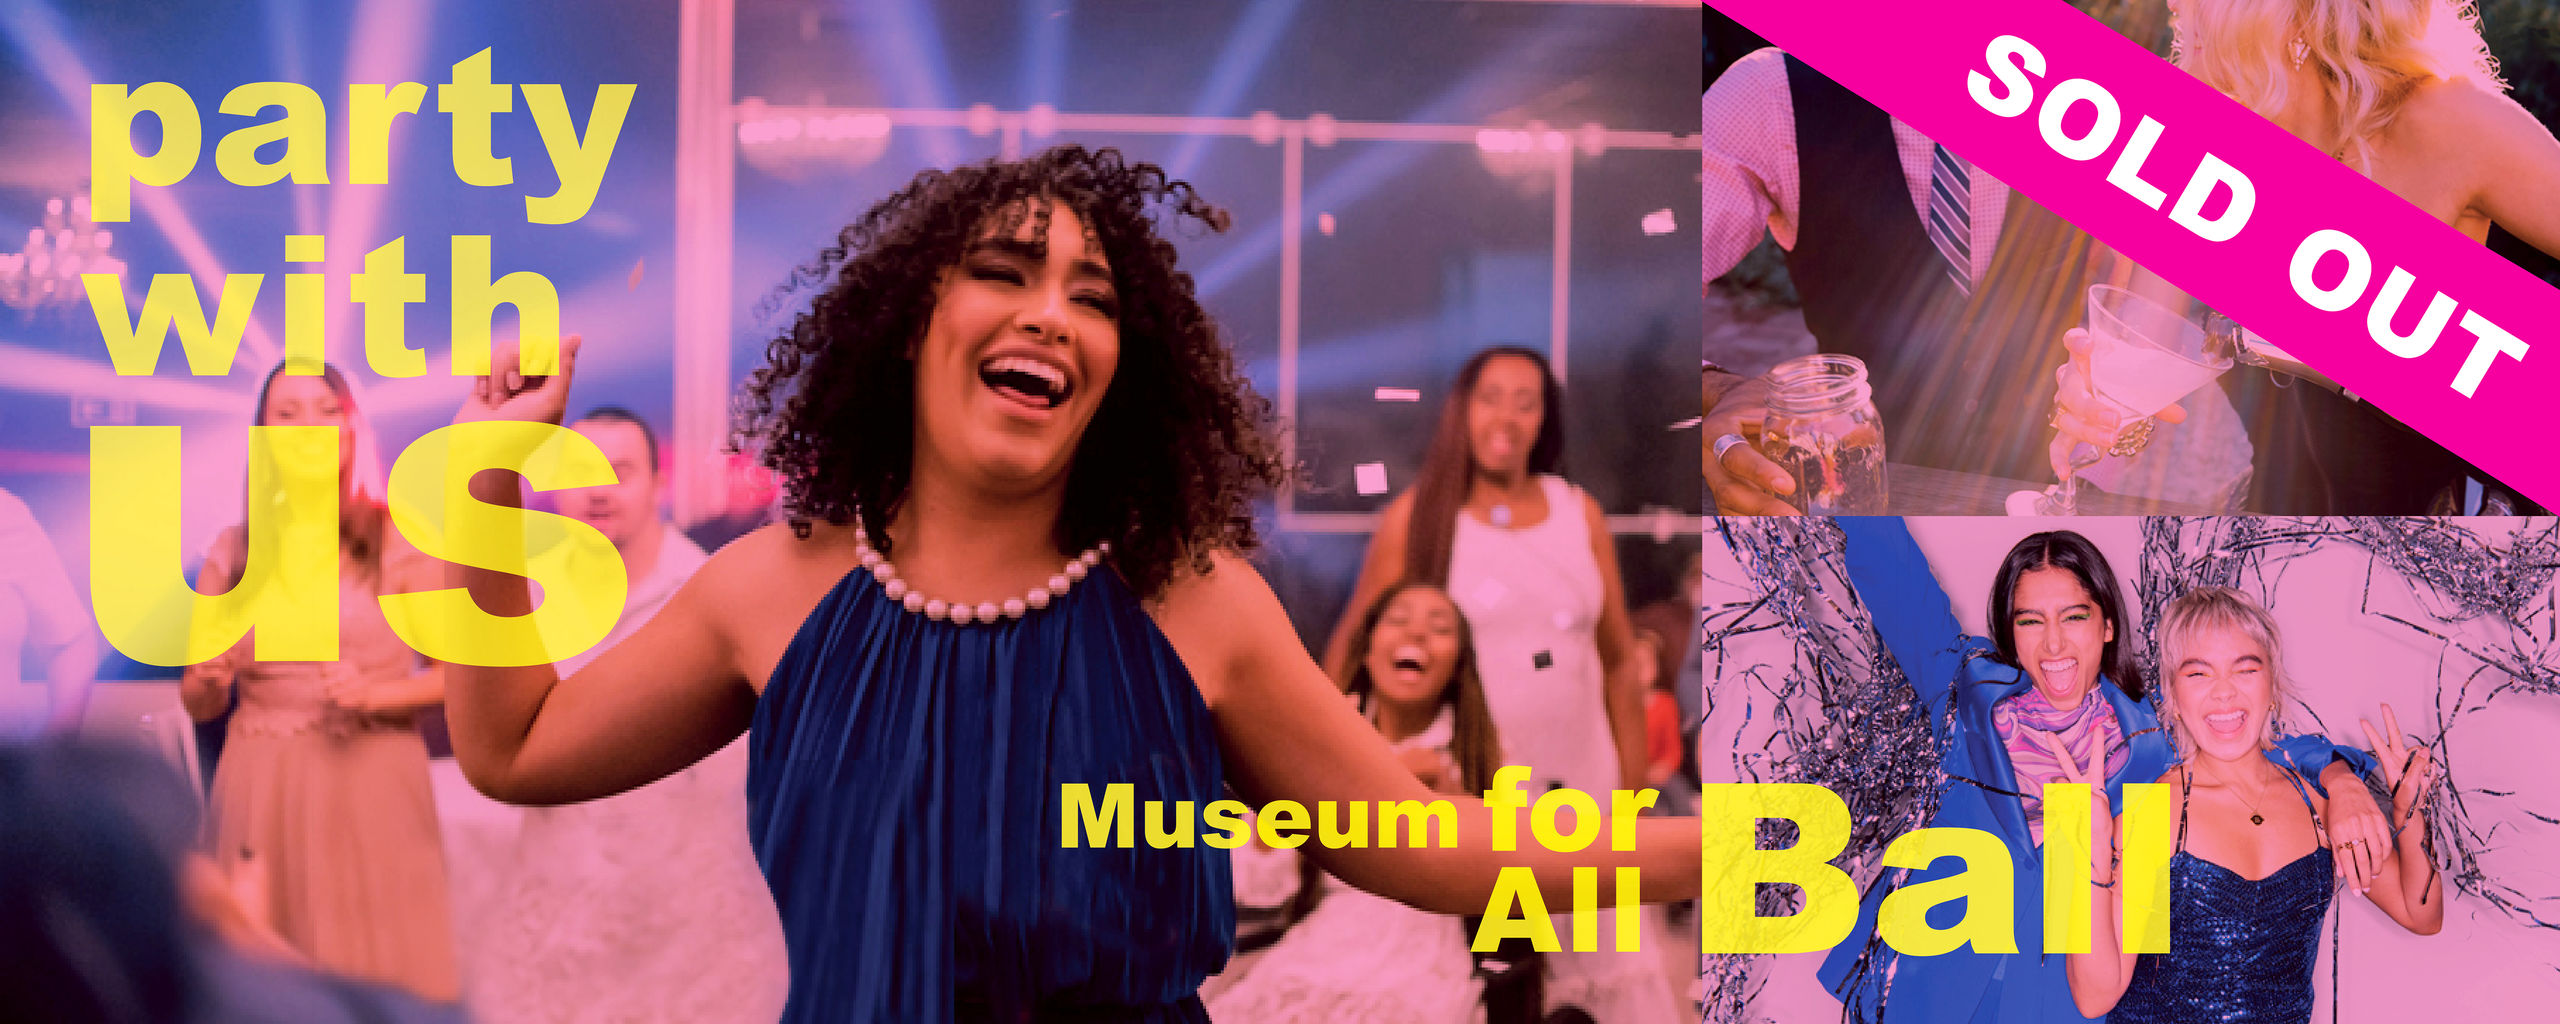 Museum for All Ball Sold Out